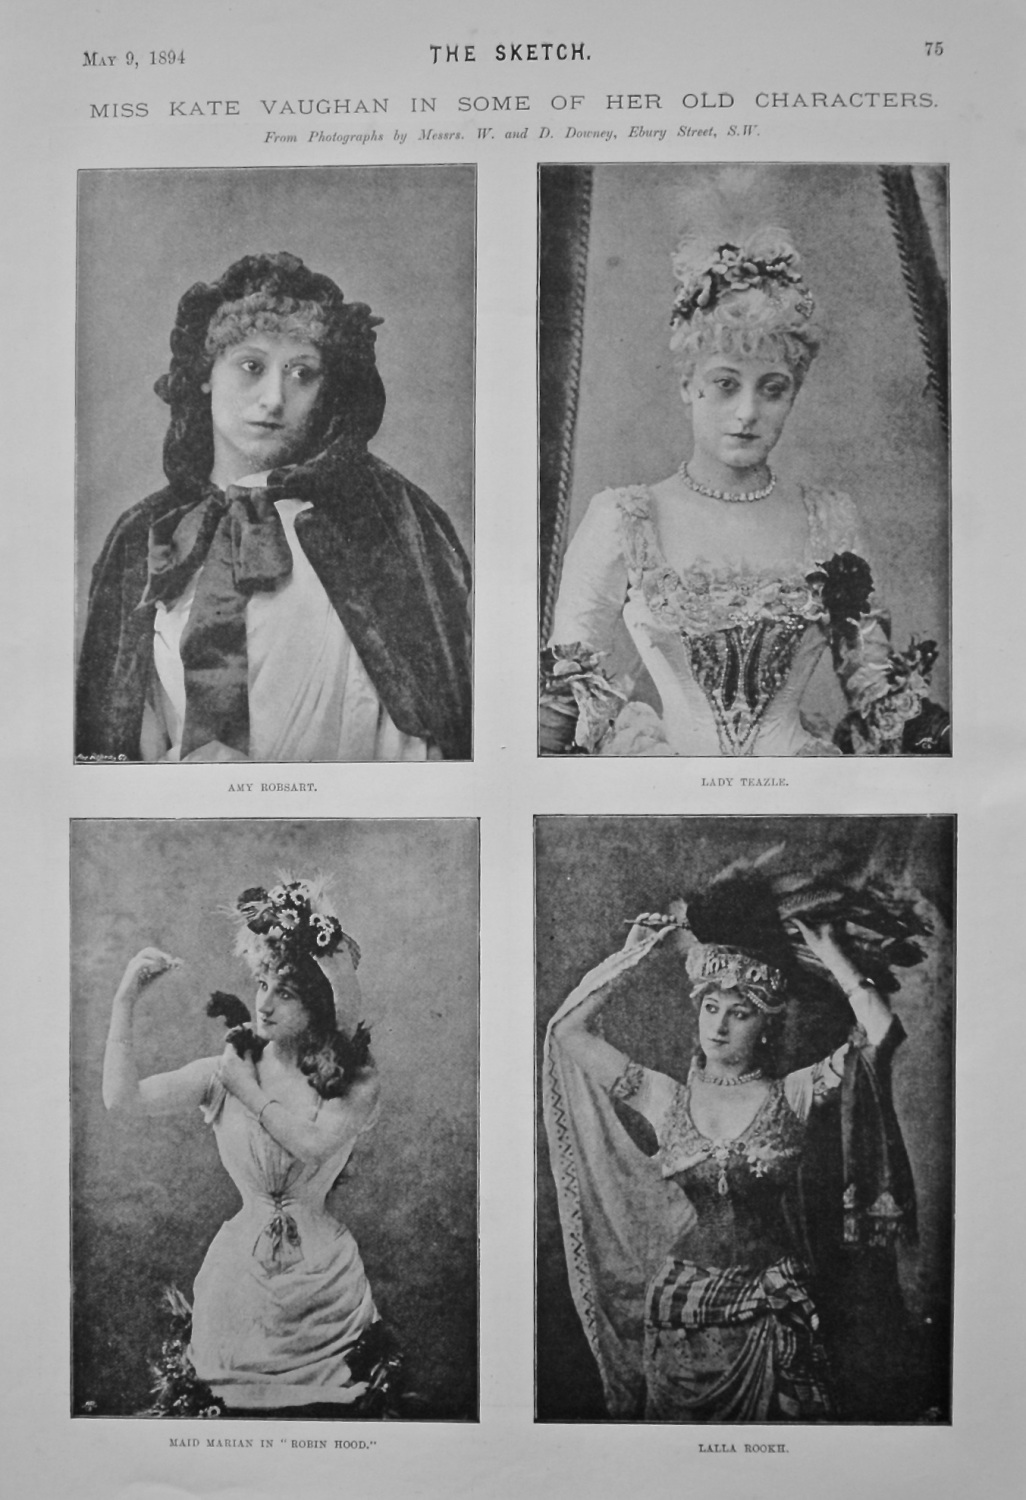 Miss Kate Vaughan in Some of Her Old Characters. 1894.